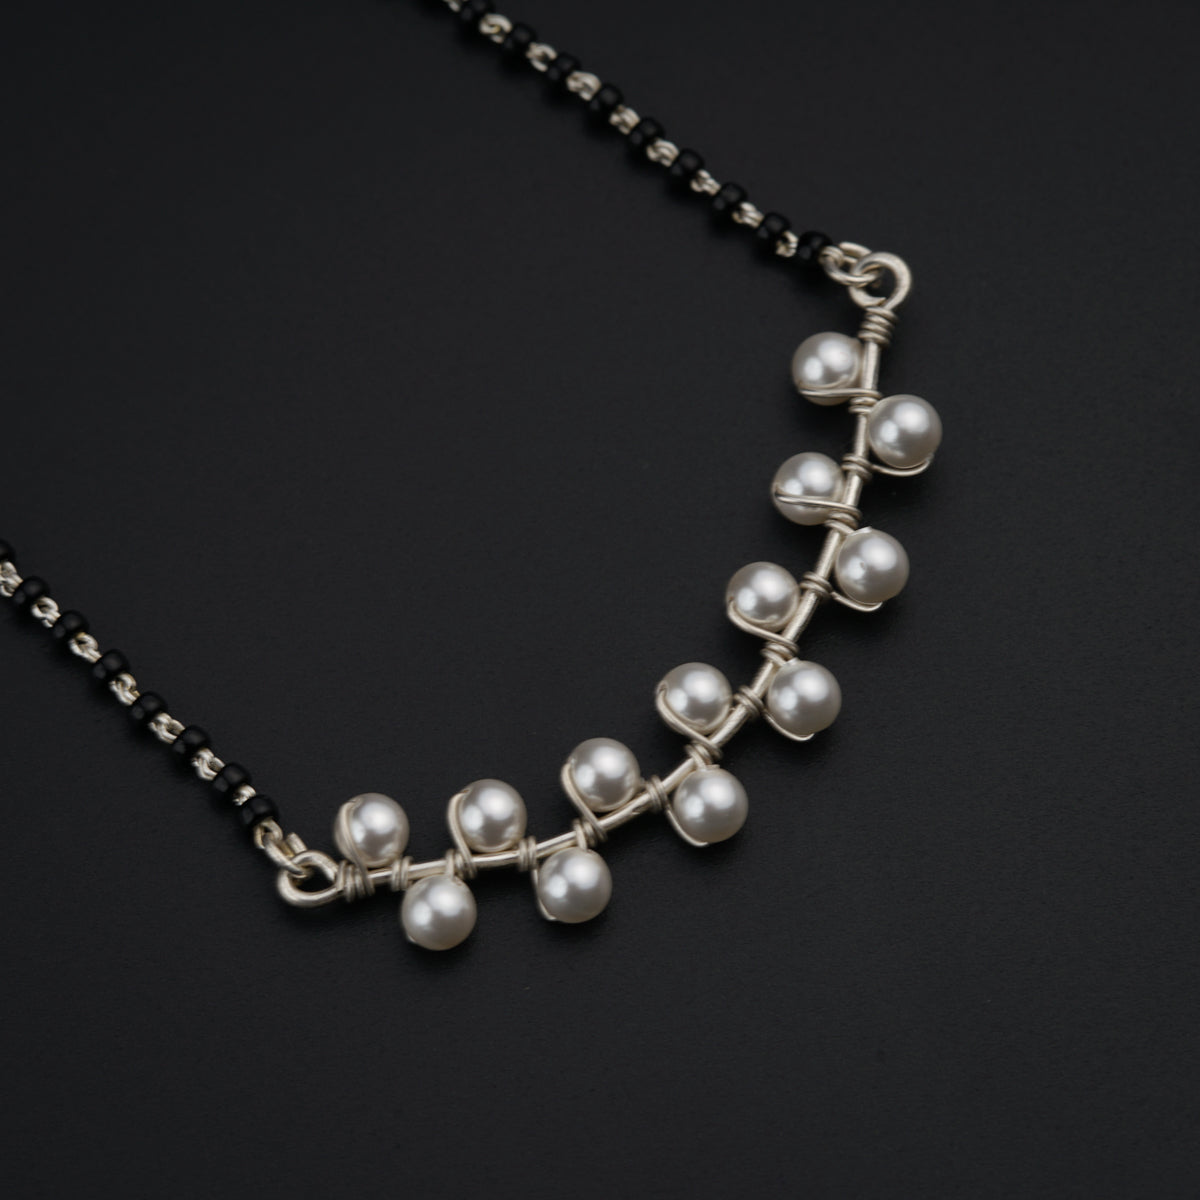 a necklace with pearls on a black background